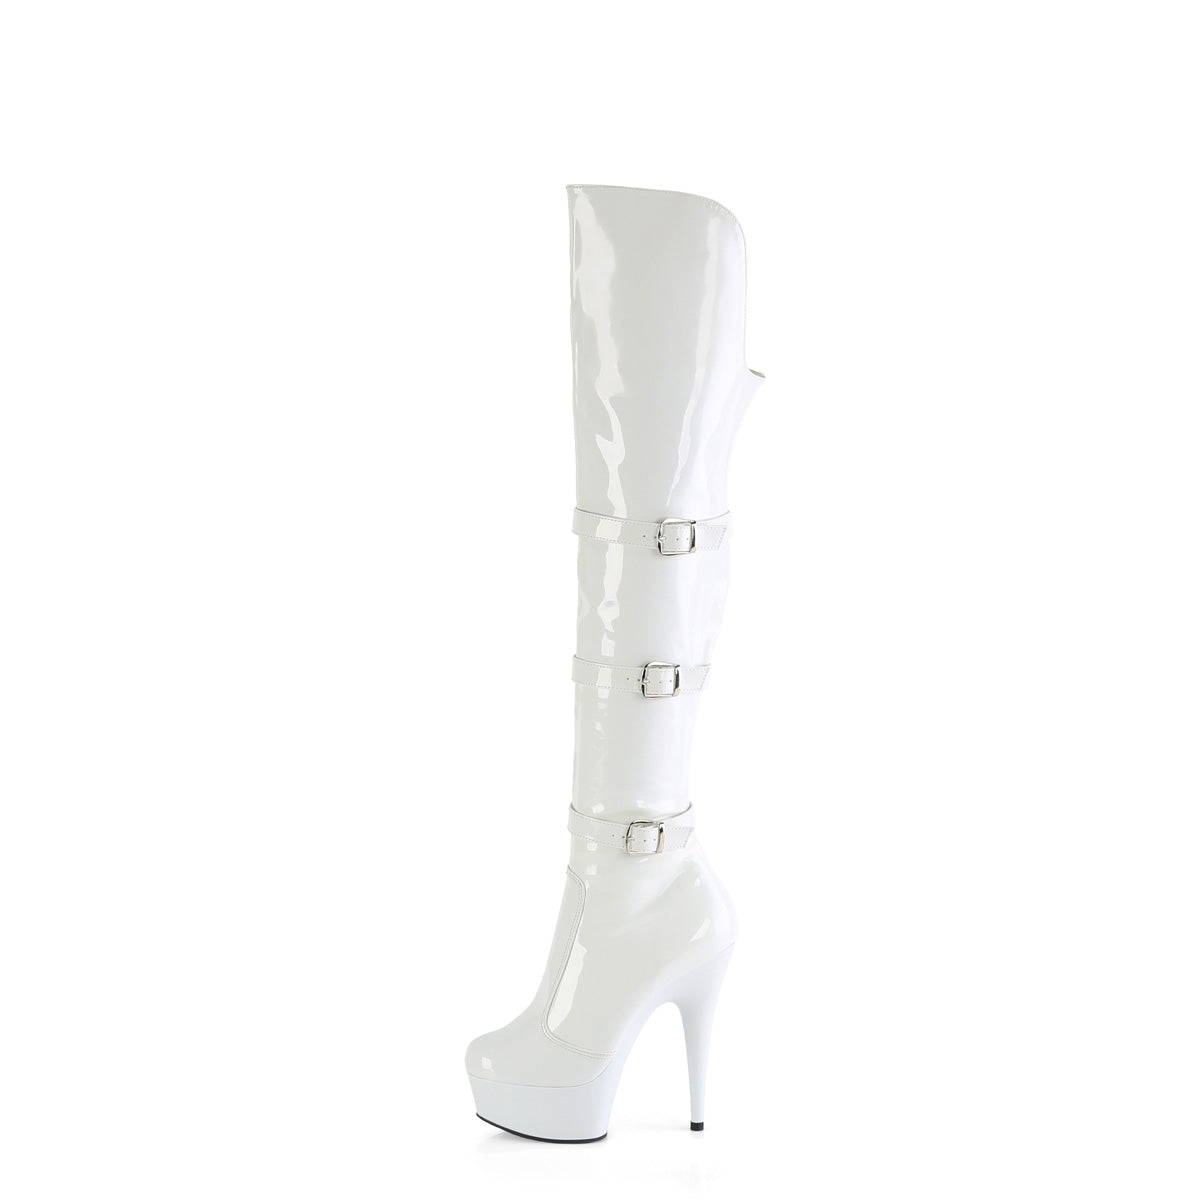 DELIGHT-3018 Pleaser White Stretch Patent/White Platform Shoes [Thigh High Boots]